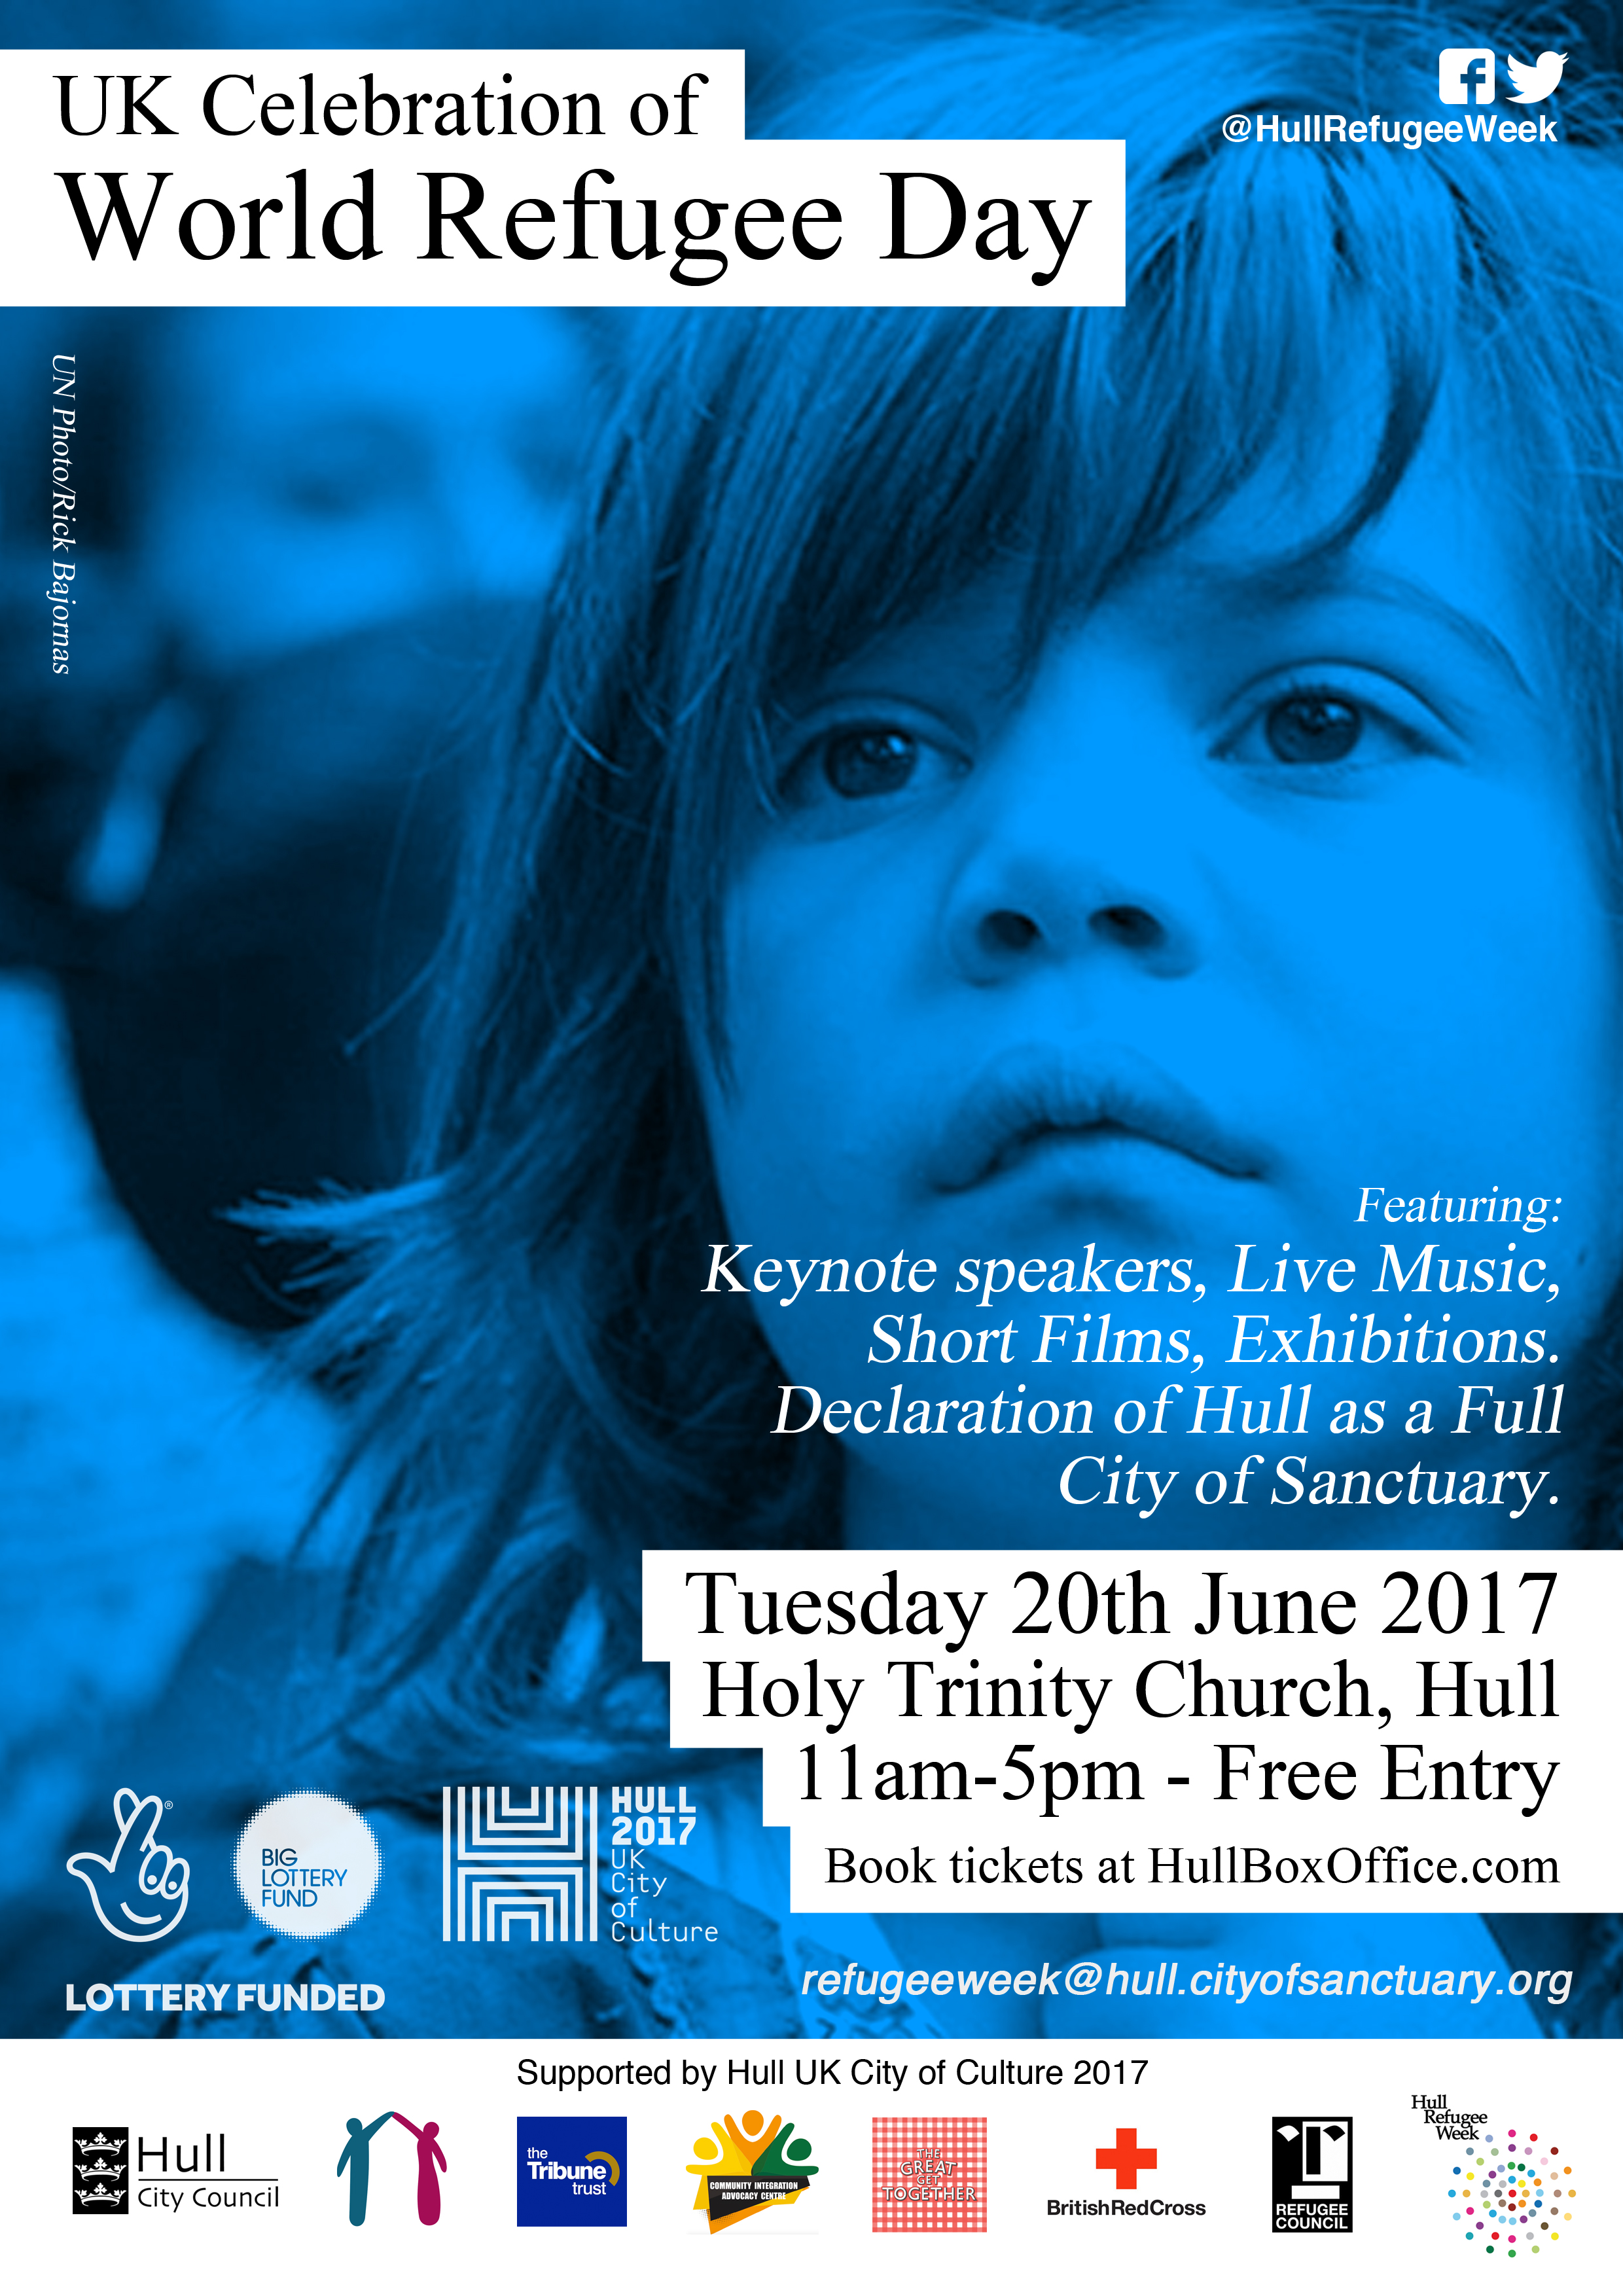 UK Celebration of World Refugee Day as part of the UK City of Culture